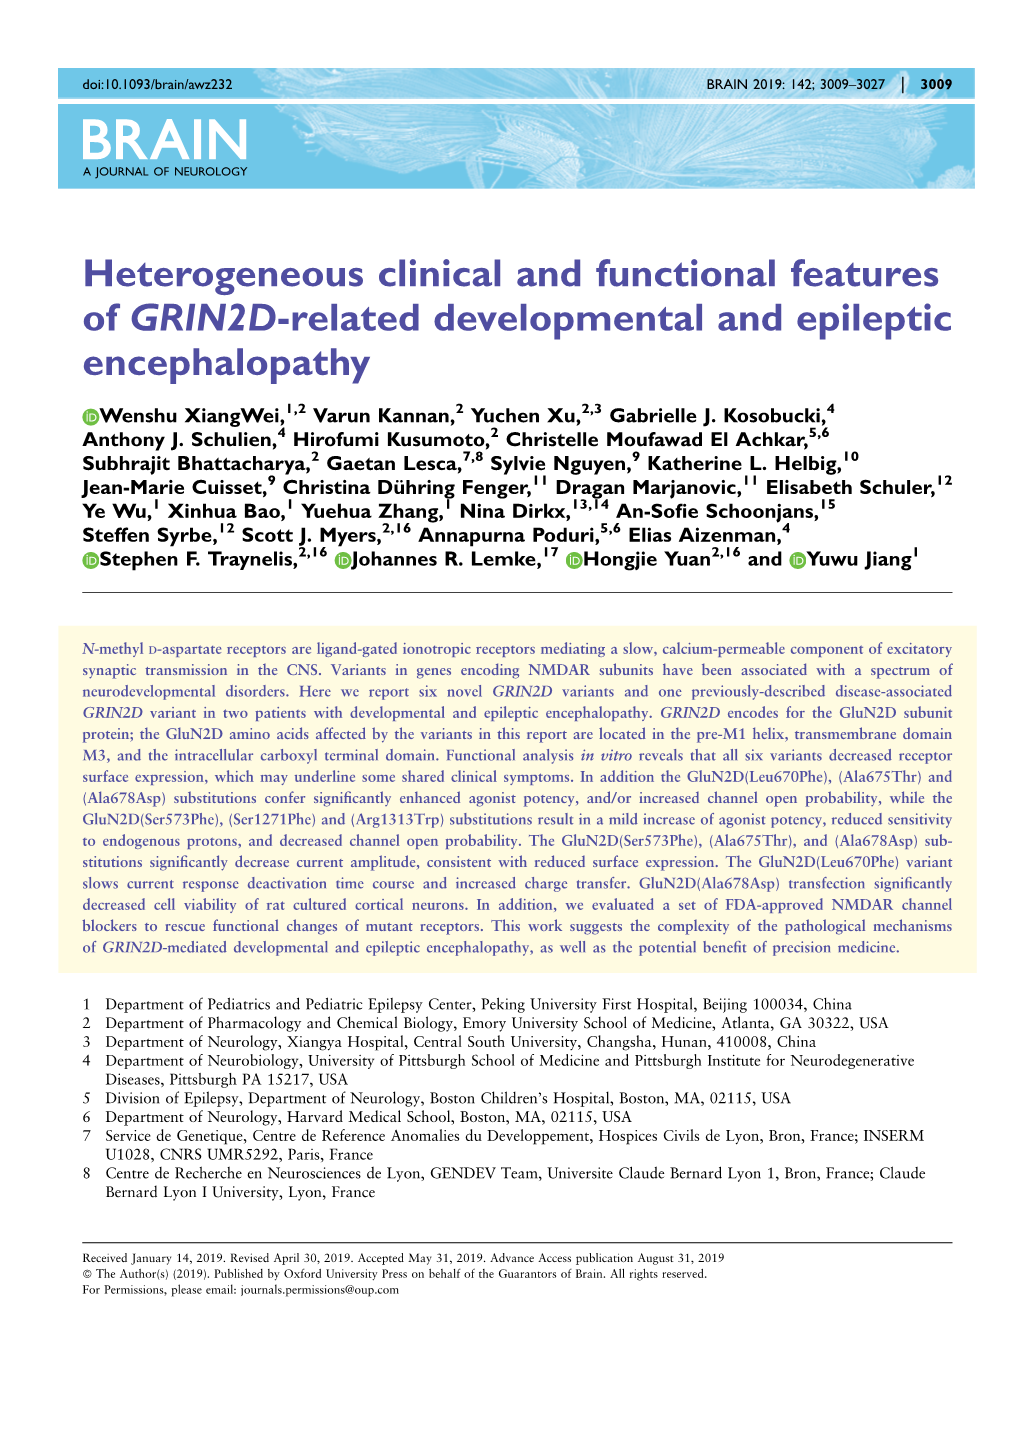 Heterogeneous Clinical and Functional Features of GRIN2D-Related Developmental and Epileptic Encephalopathy